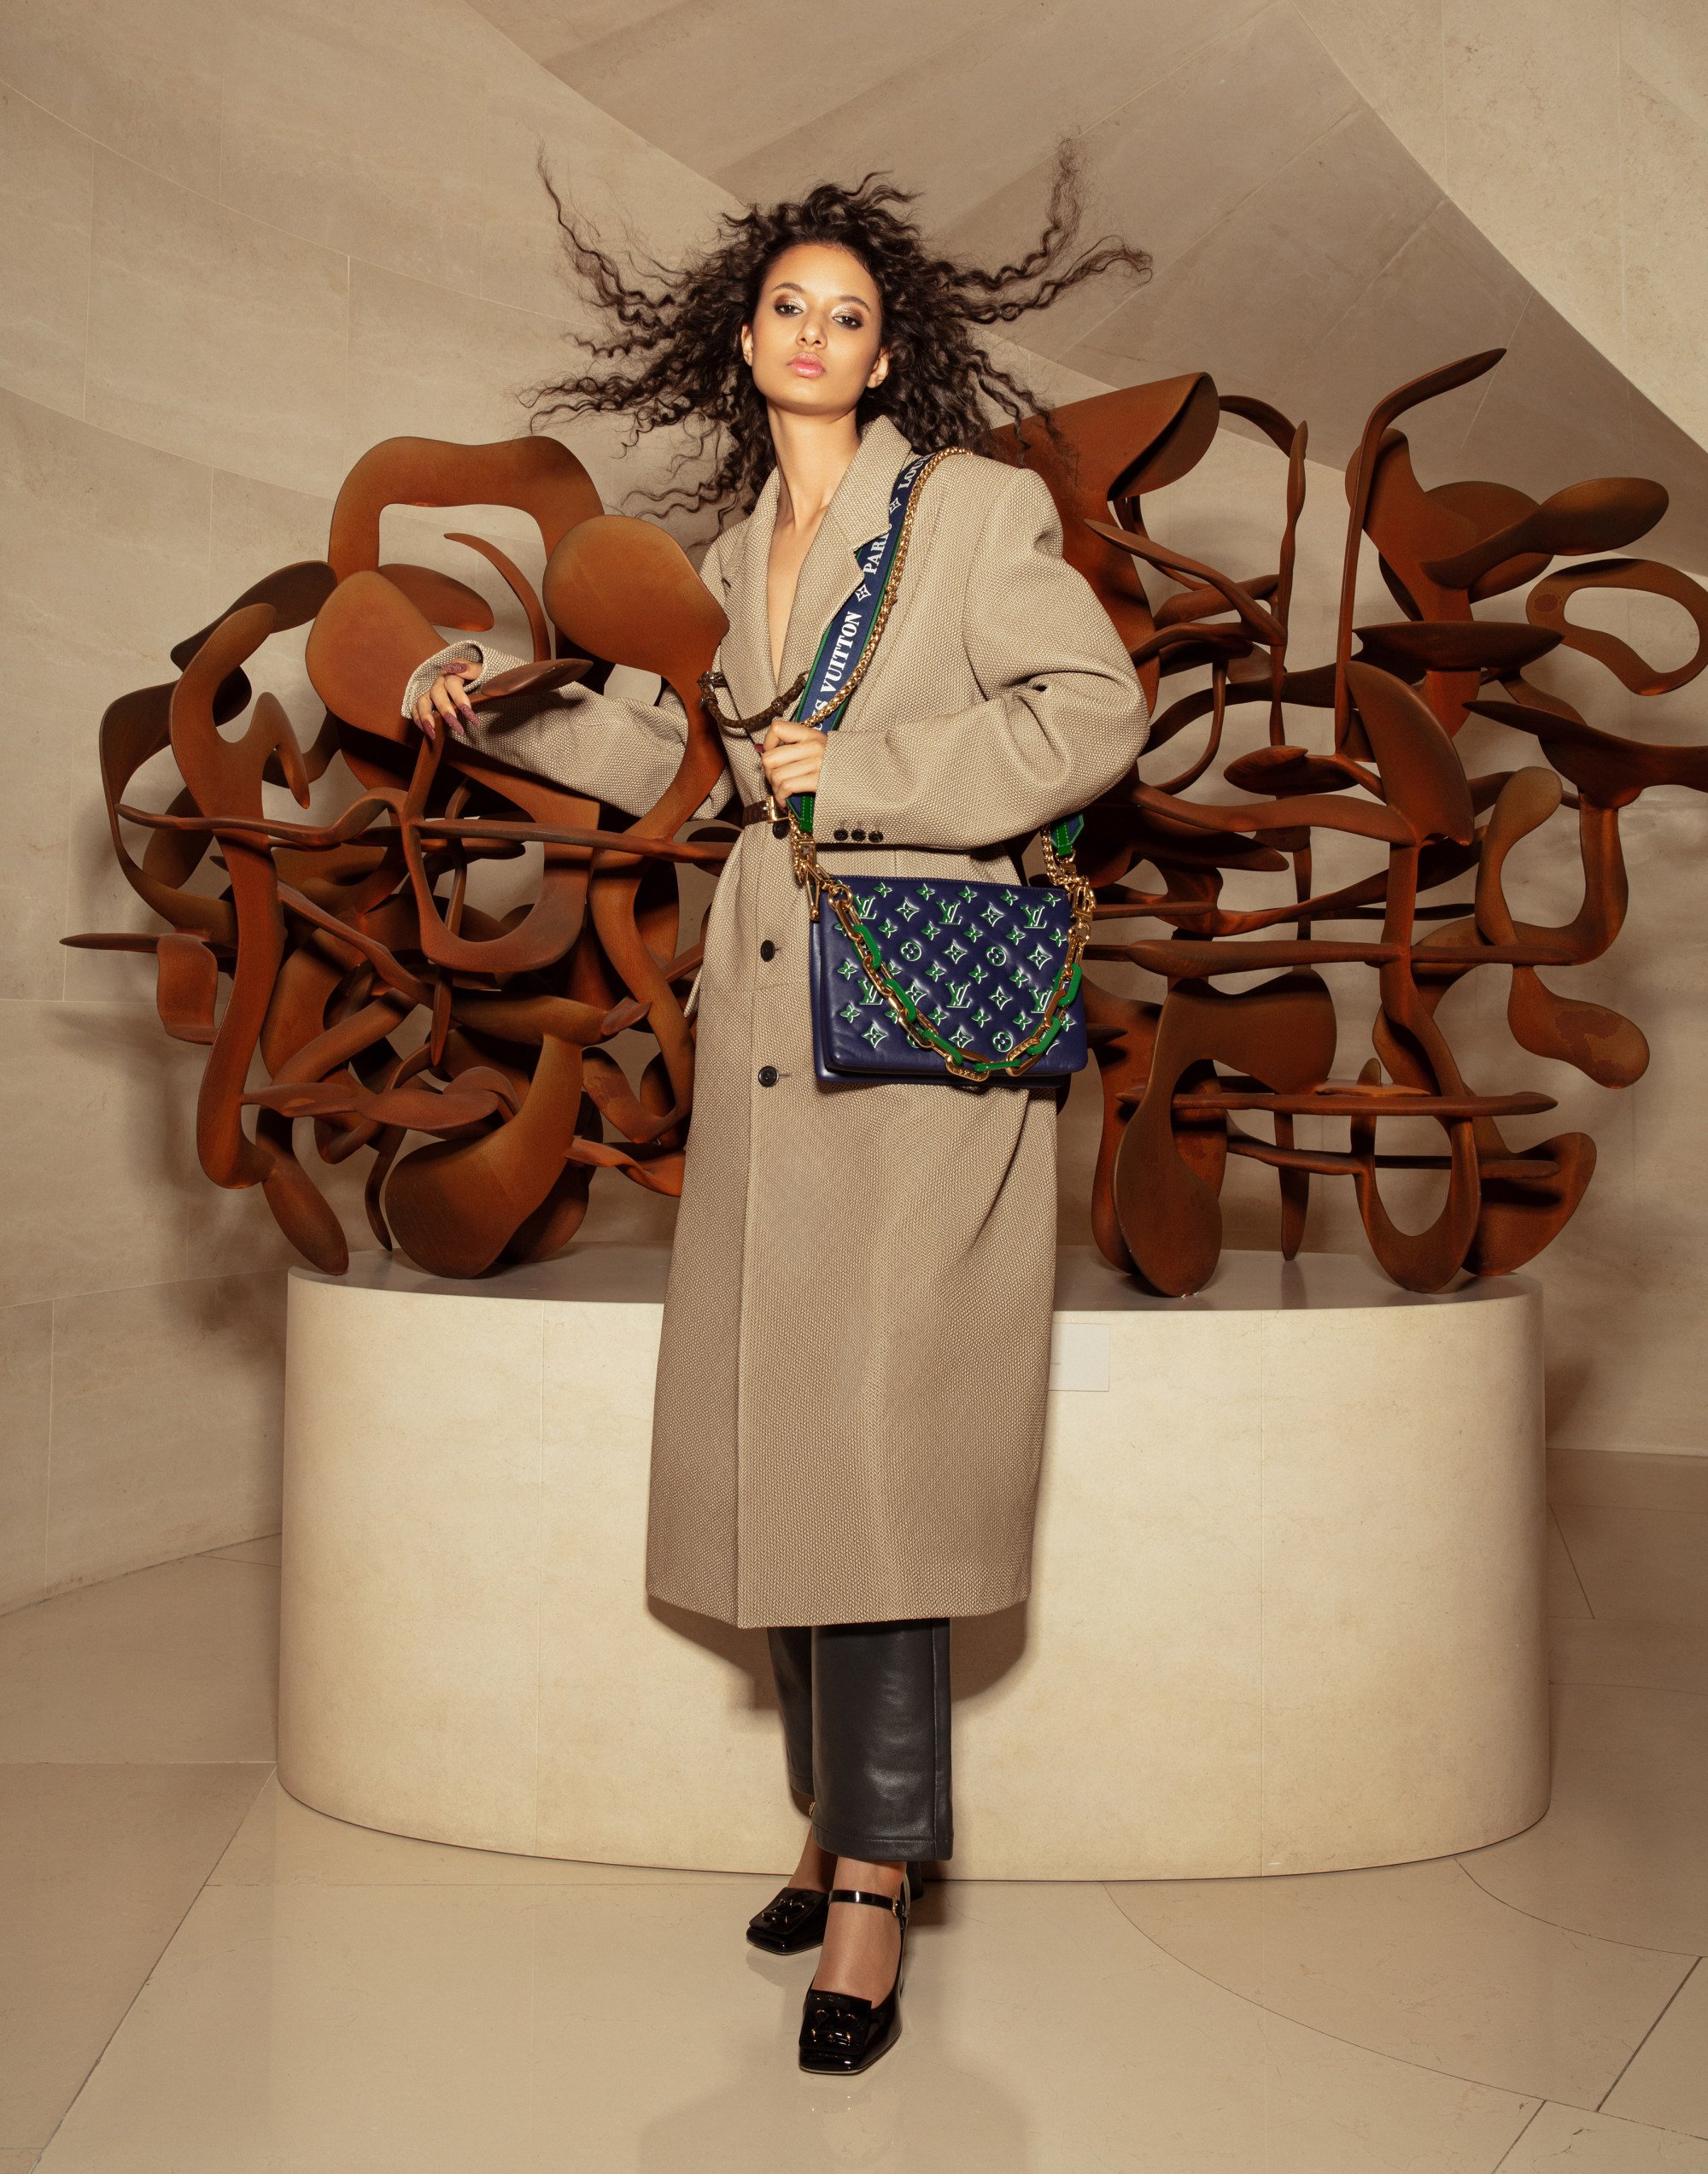 Hermès cannot meet demand for luxury as profits leap to £257m